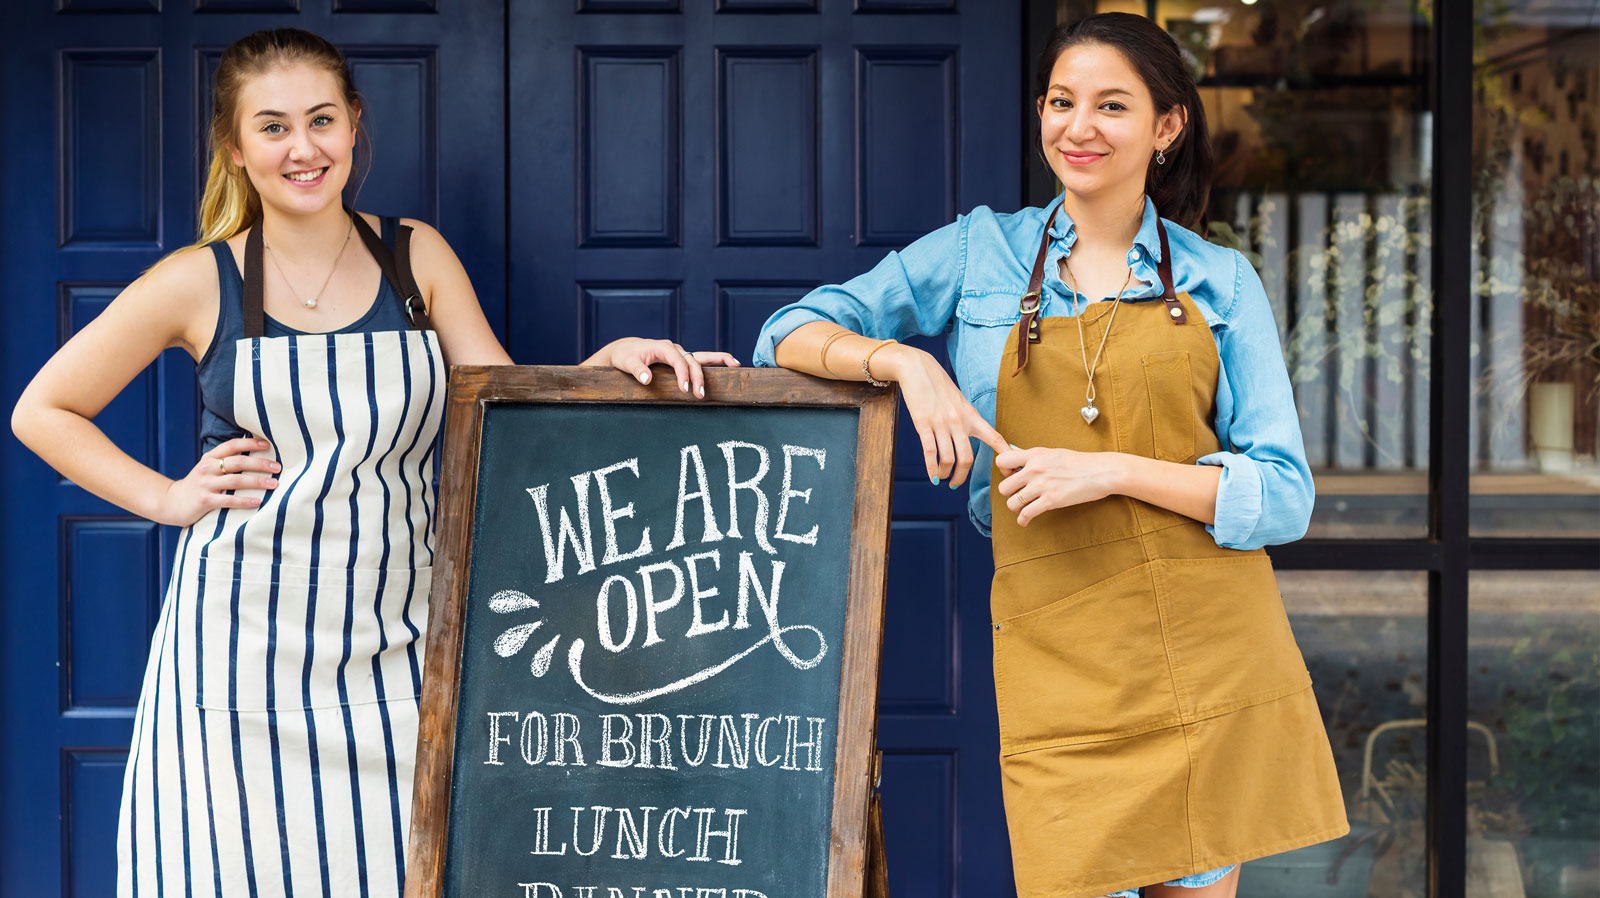 Take These Marketing Steps When Opening a New Franchise Location